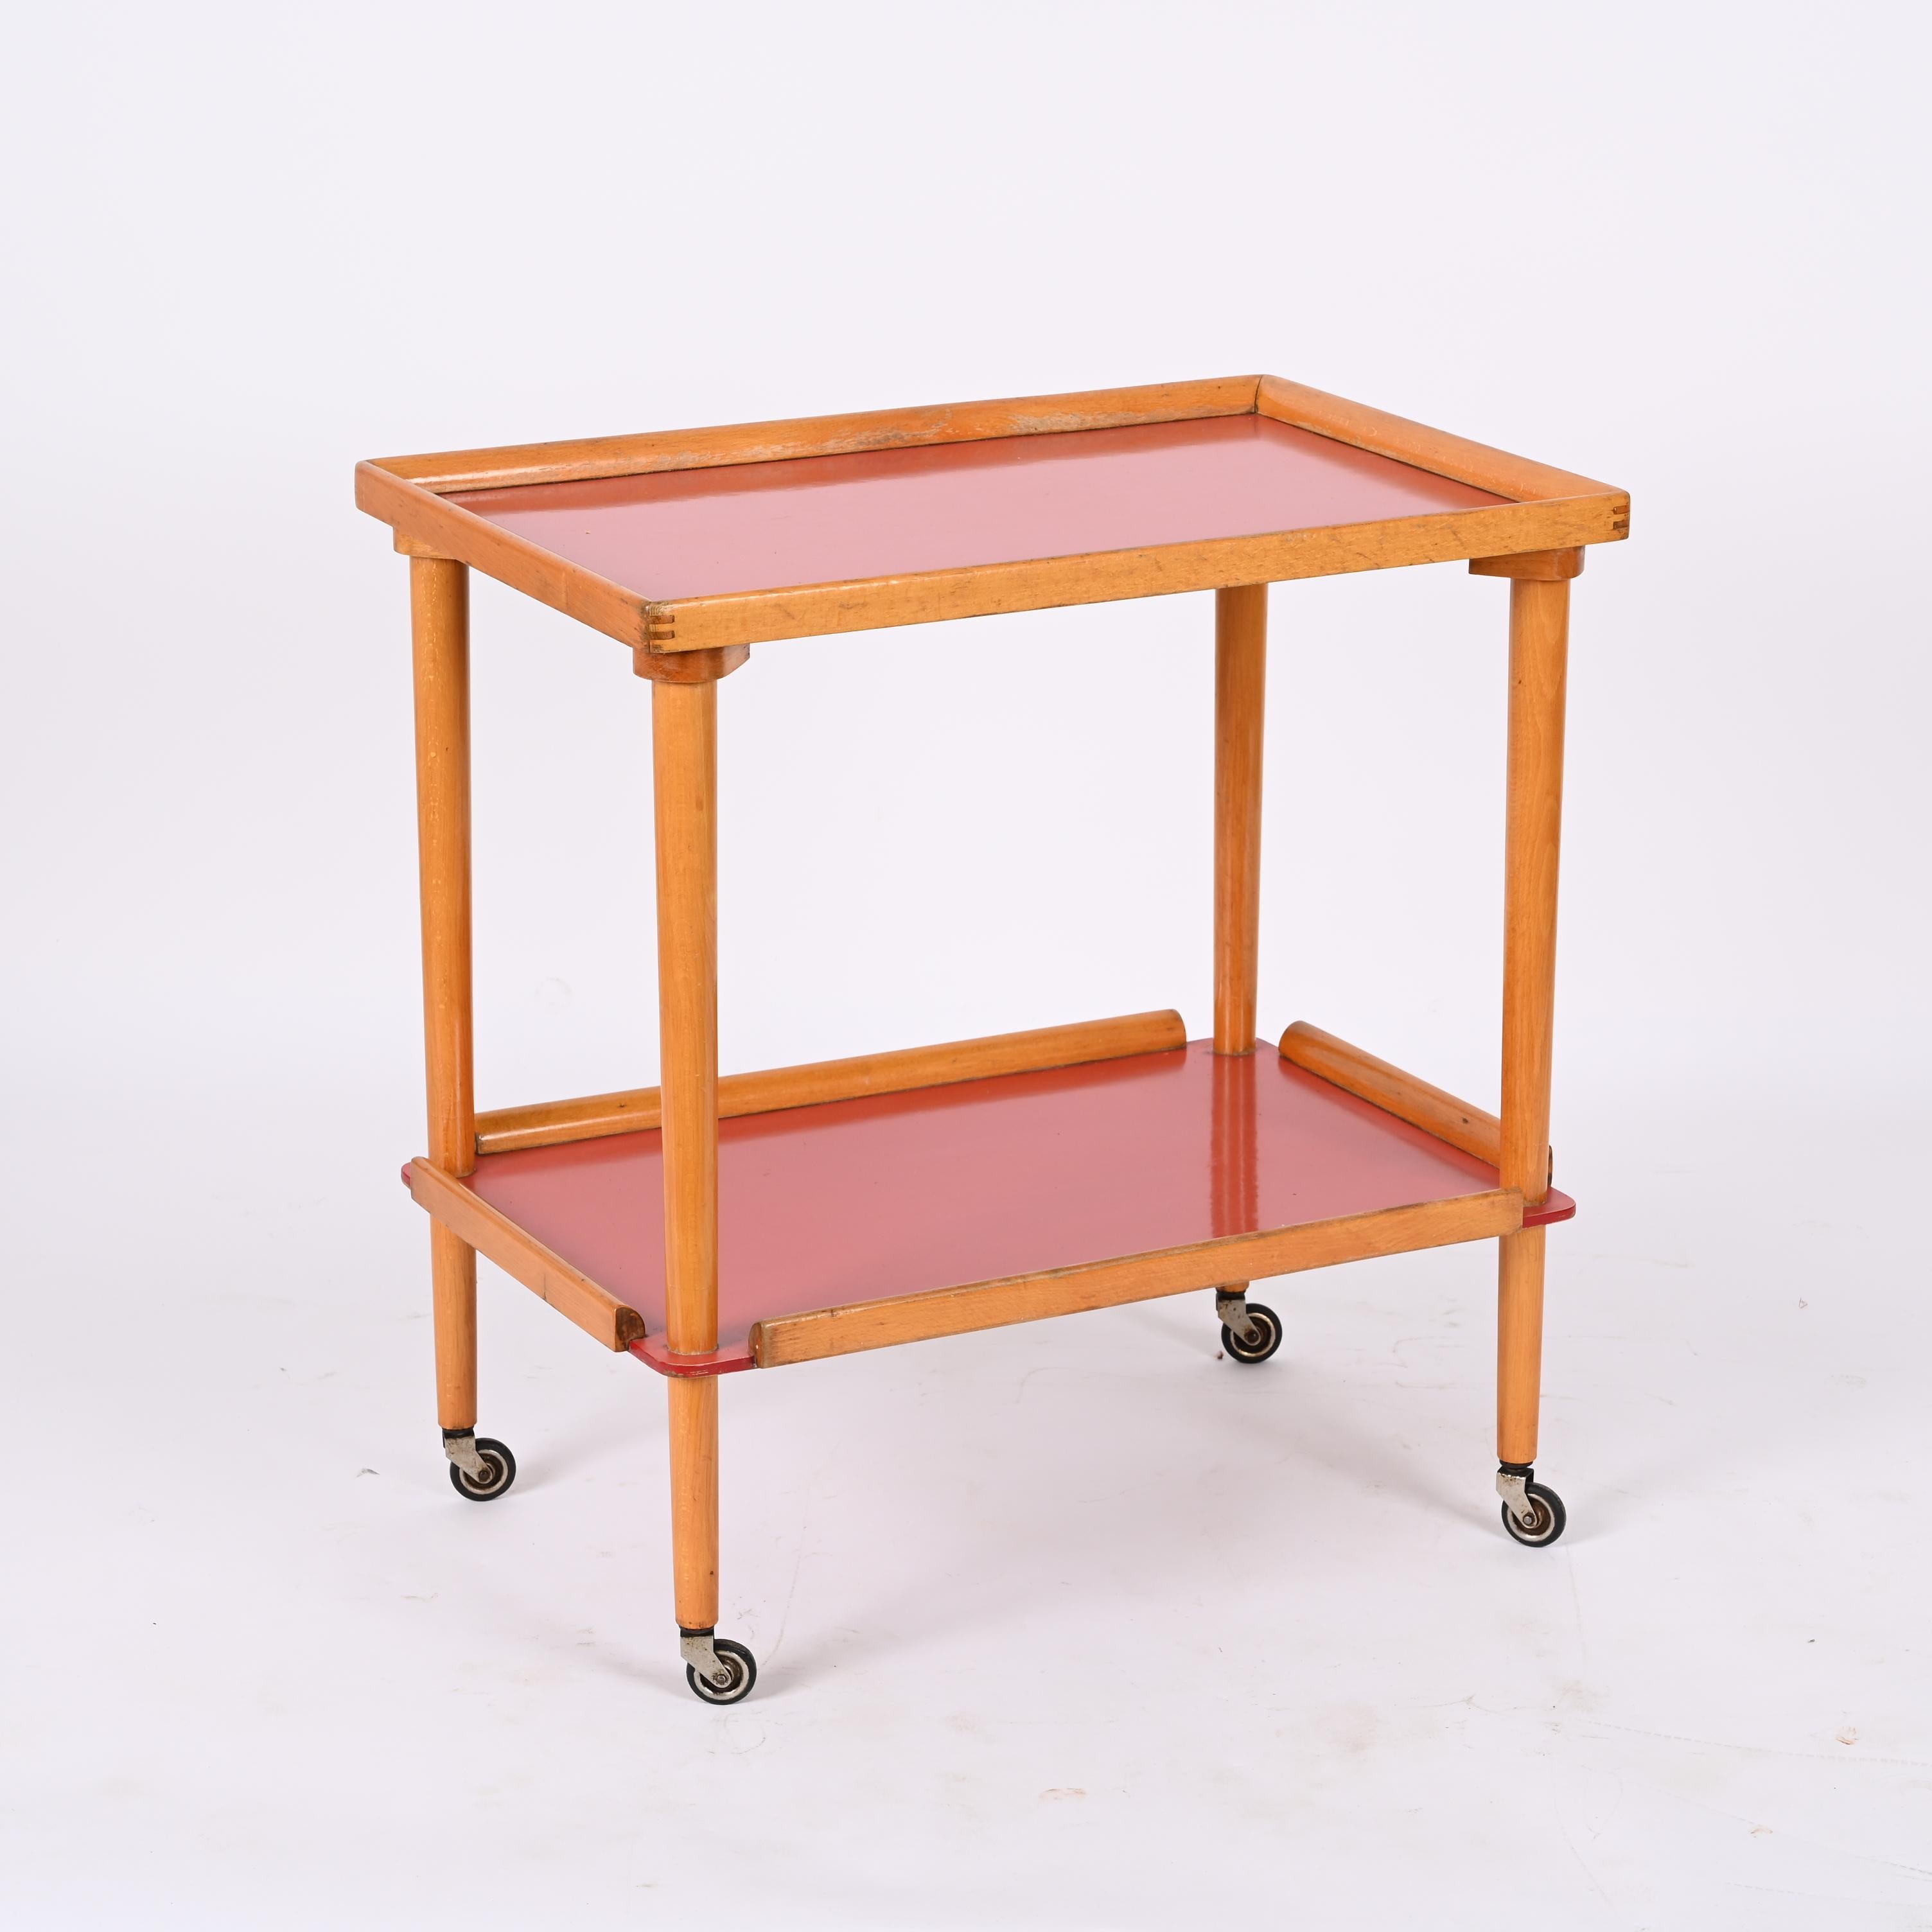 Mid-20th Century Midcentury Italian Beech Wood and Formica Red Two Tiered Bar Cart, 1960s For Sale